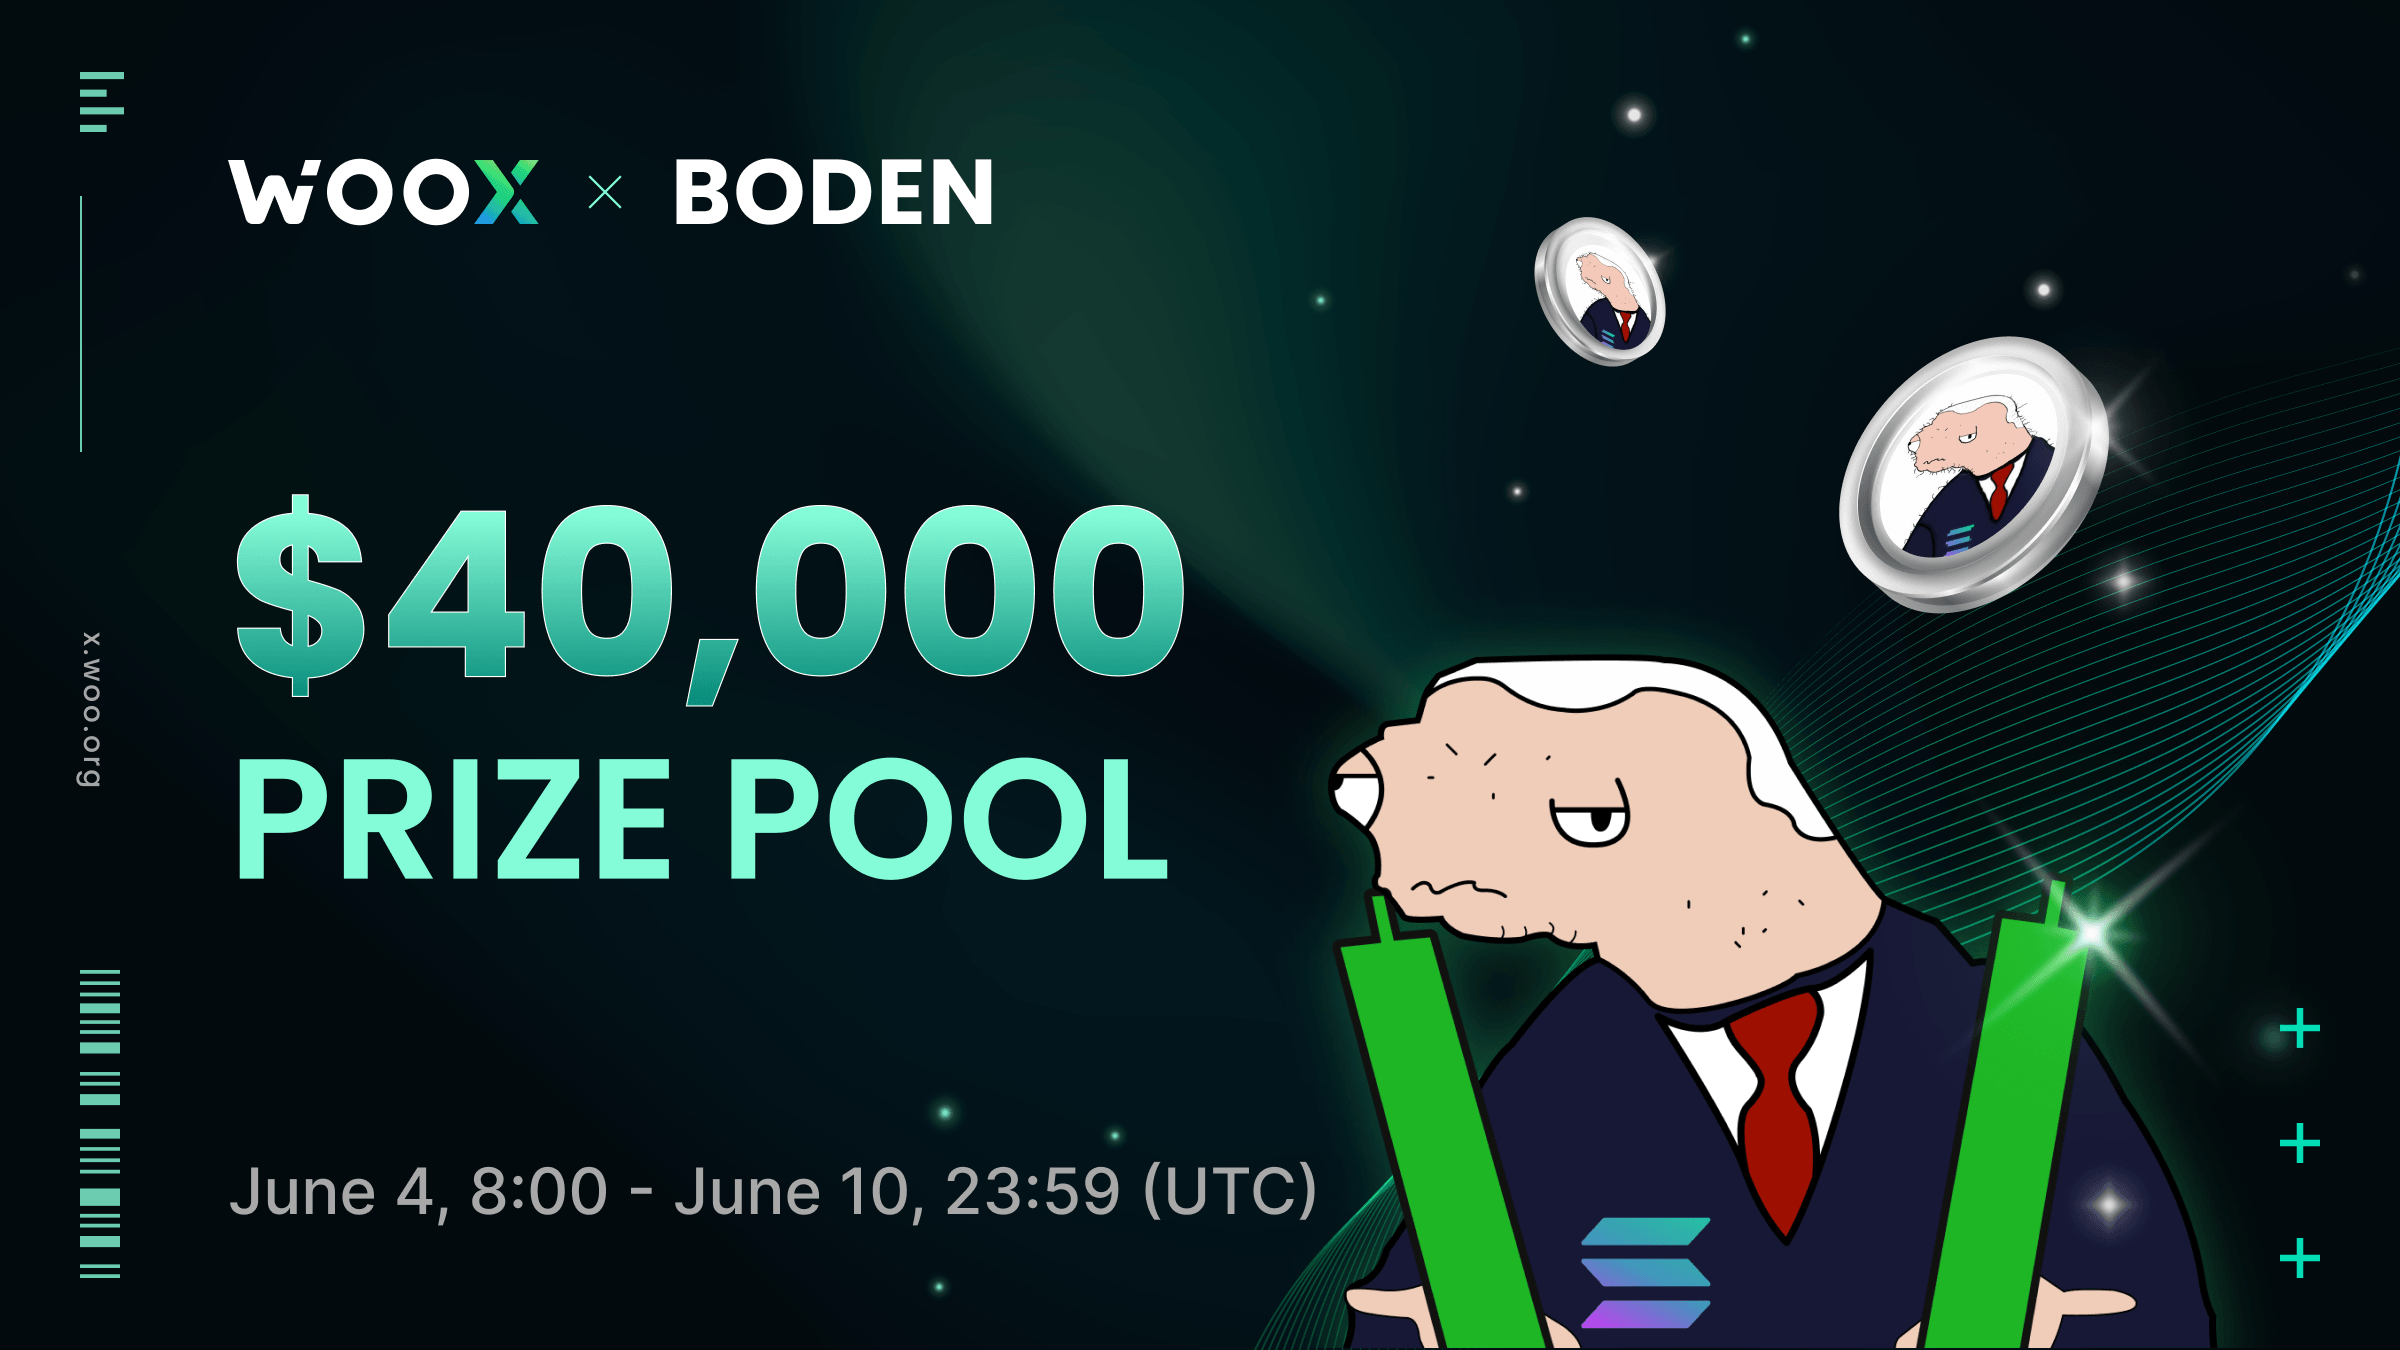 Win from a $40,000 BODEN prize pool and be happy!